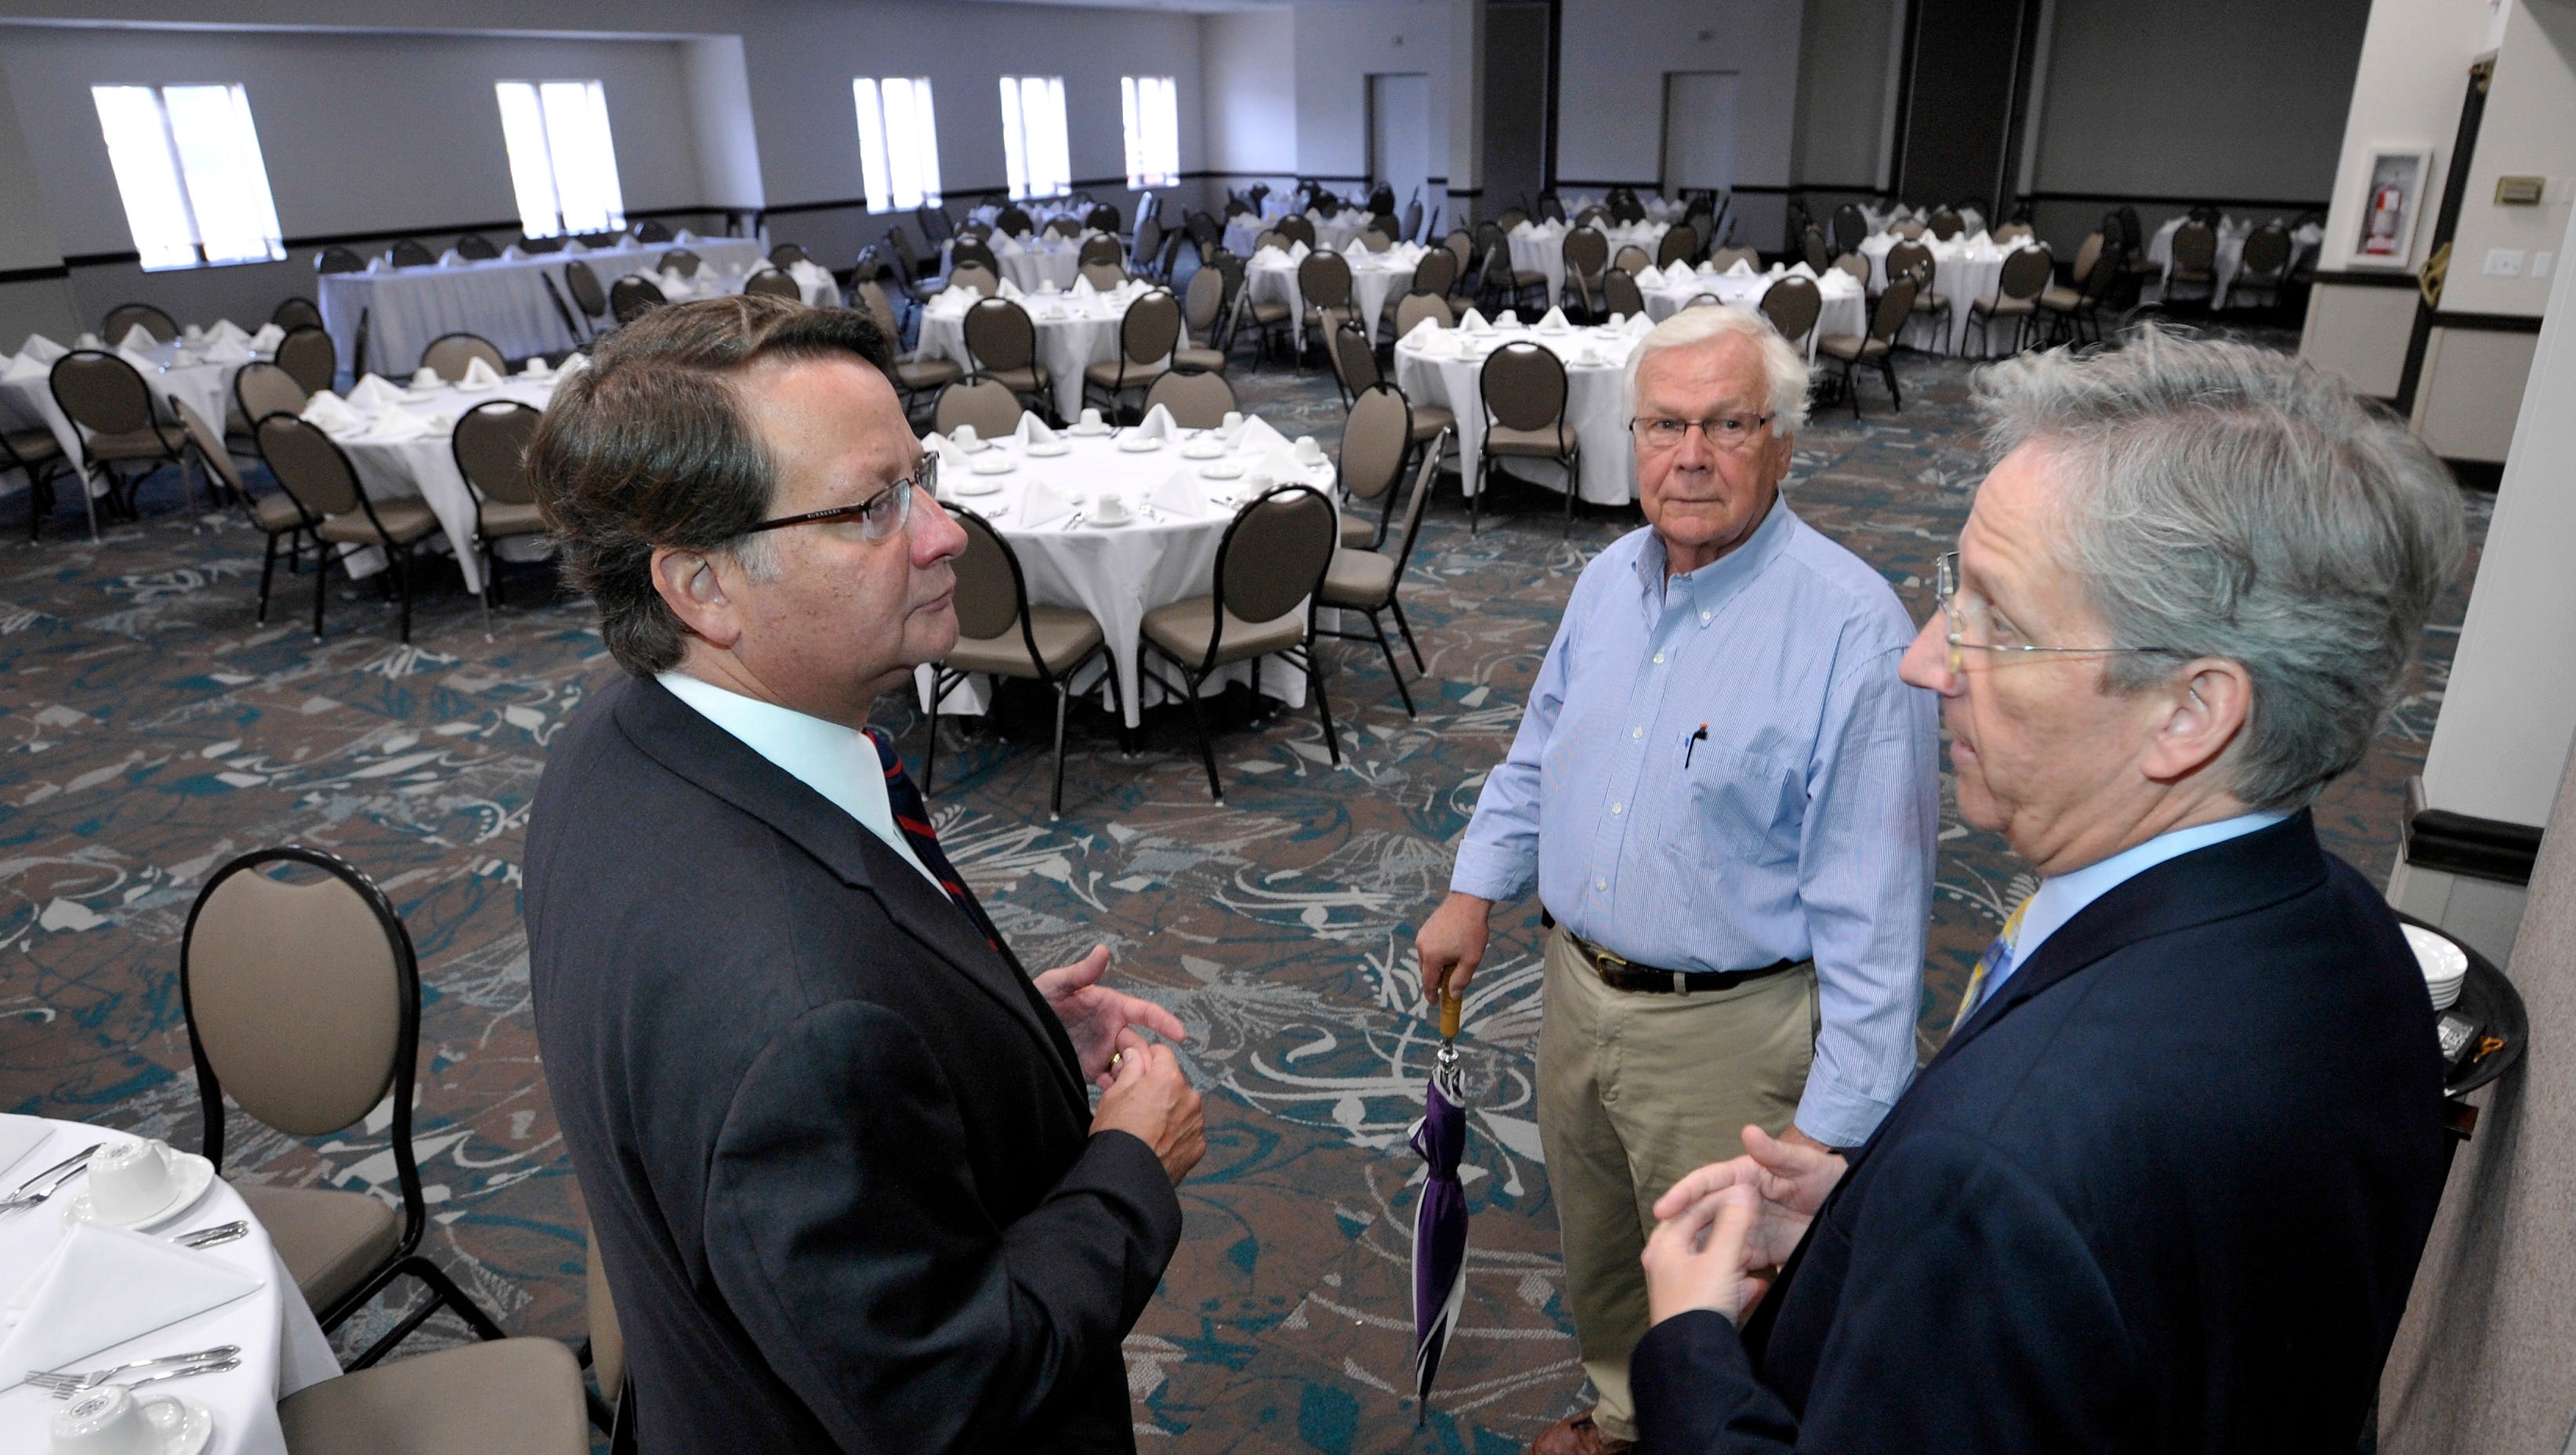 U.S. Congressman Gary Peters, left, talks with St. Clair County Commissioner Howard Heidemann, center, and St. Clair County Administrator / Controller Bill Kauffman, right, in the convention center ball room.